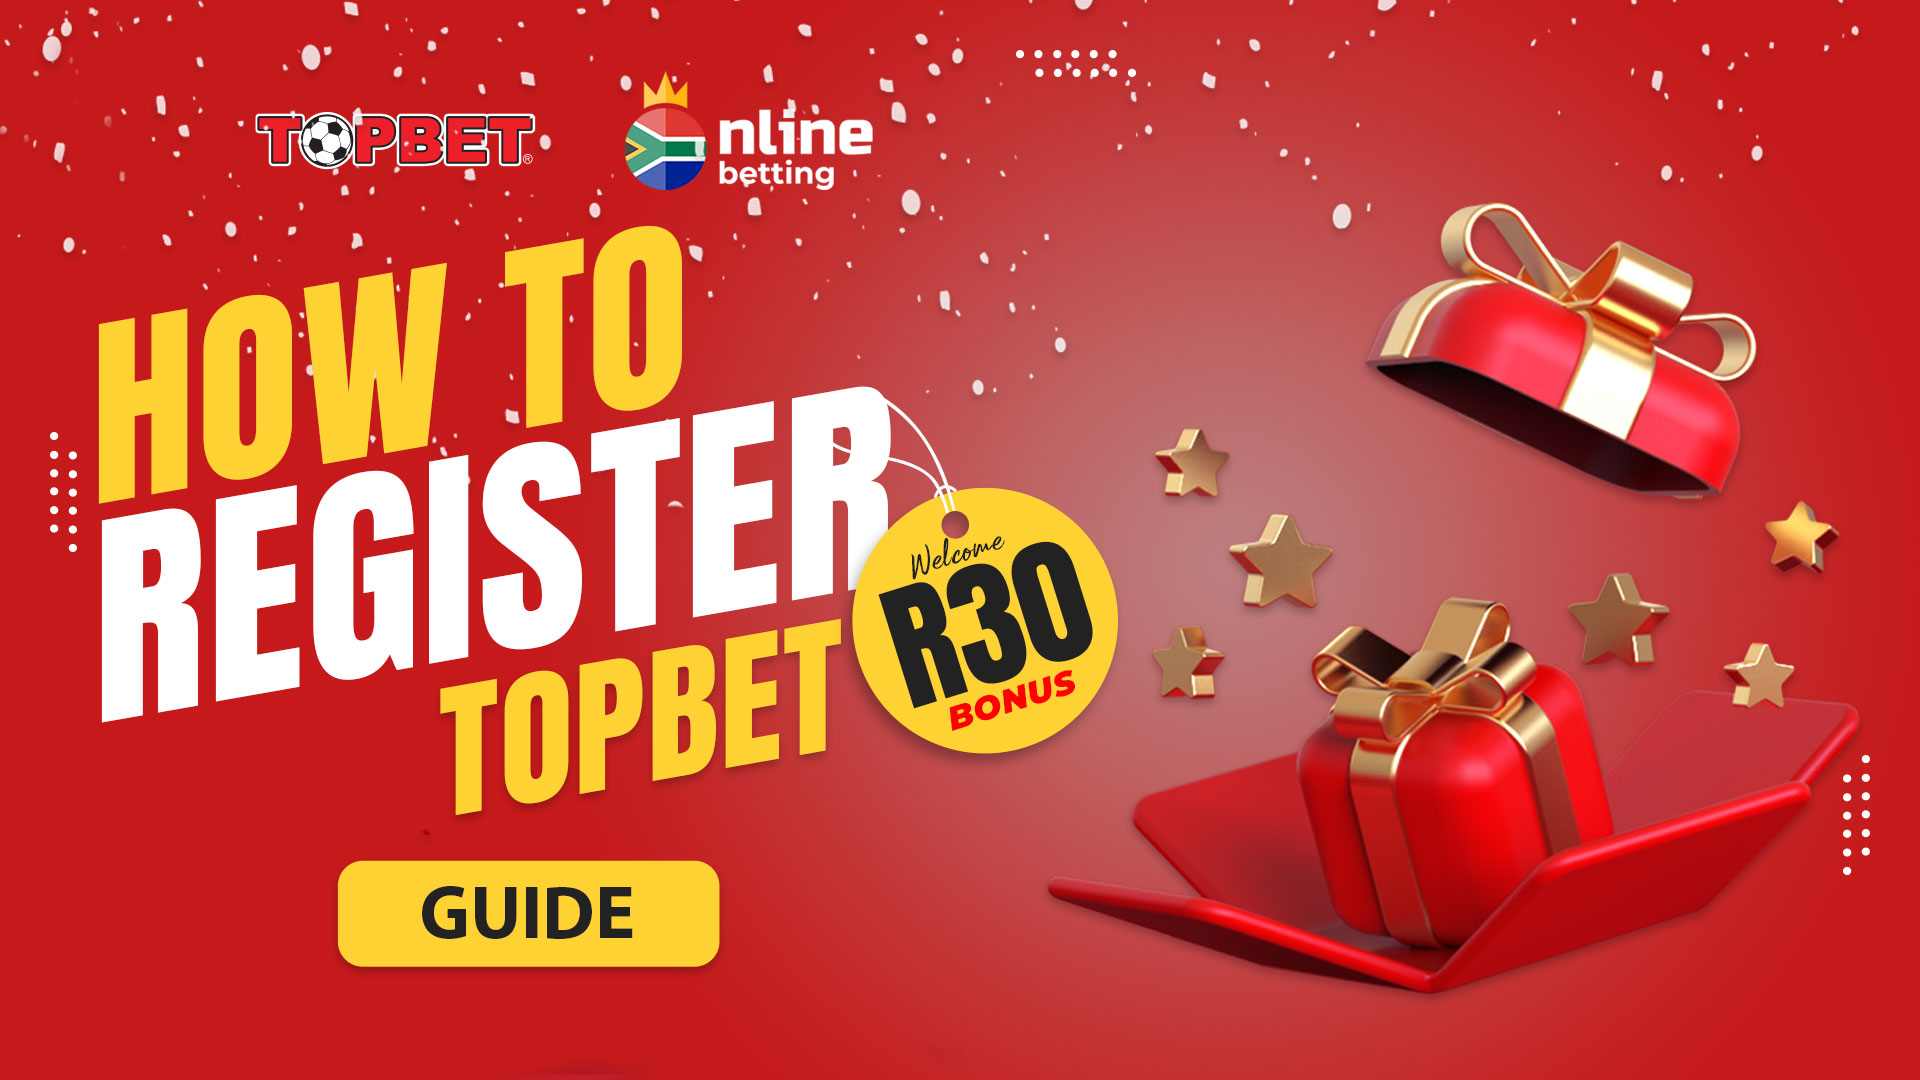 How to register in Topbet online: uploading FICA and creating account with bonus